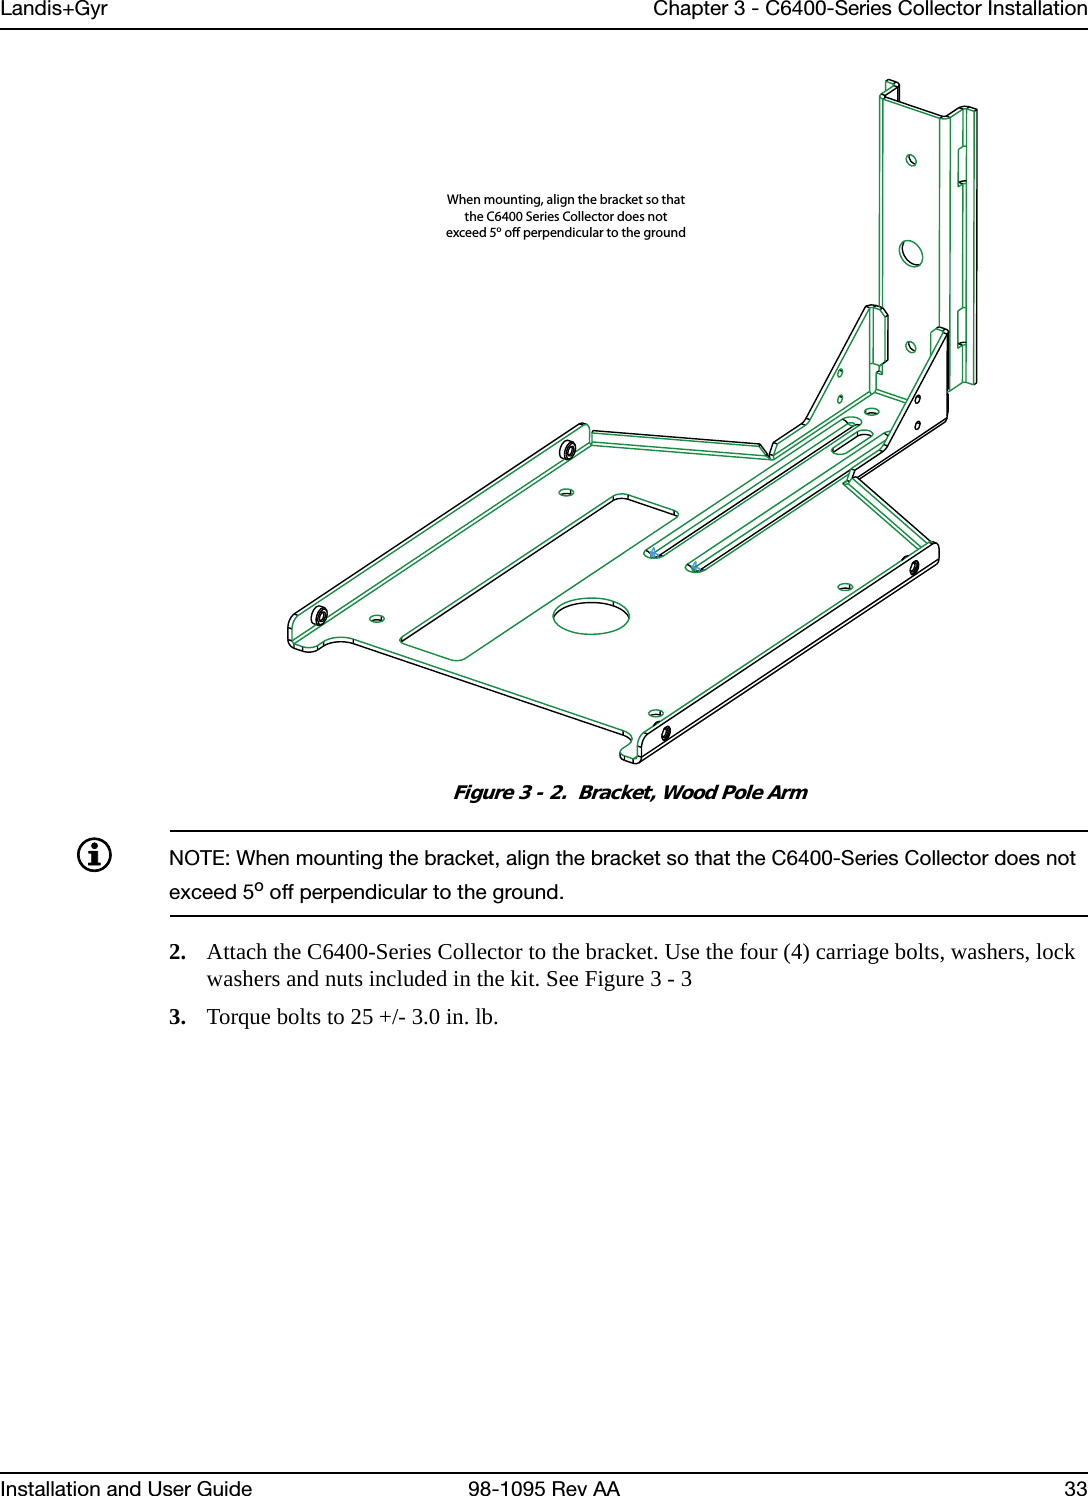 Landis+Gyr Chapter 3 - C6400-Series Collector InstallationInstallation and User Guide 98-1095 Rev AA 33Figure 3 - 2.  Bracket, Wood Pole ArmNOTE: When mounting the bracket, align the bracket so that the C6400-Series Collector does not exceed 5o off perpendicular to the ground.2. Attach the C6400-Series Collector to the bracket. Use the four (4) carriage bolts, washers, lock washers and nuts included in the kit. See Figure 3 - 33. Torque bolts to 25 +/- 3.0 in. lb.When mounting, align the bracket so thatthe C6400 Series Collector does notexceed 5o o perpendicular to the ground